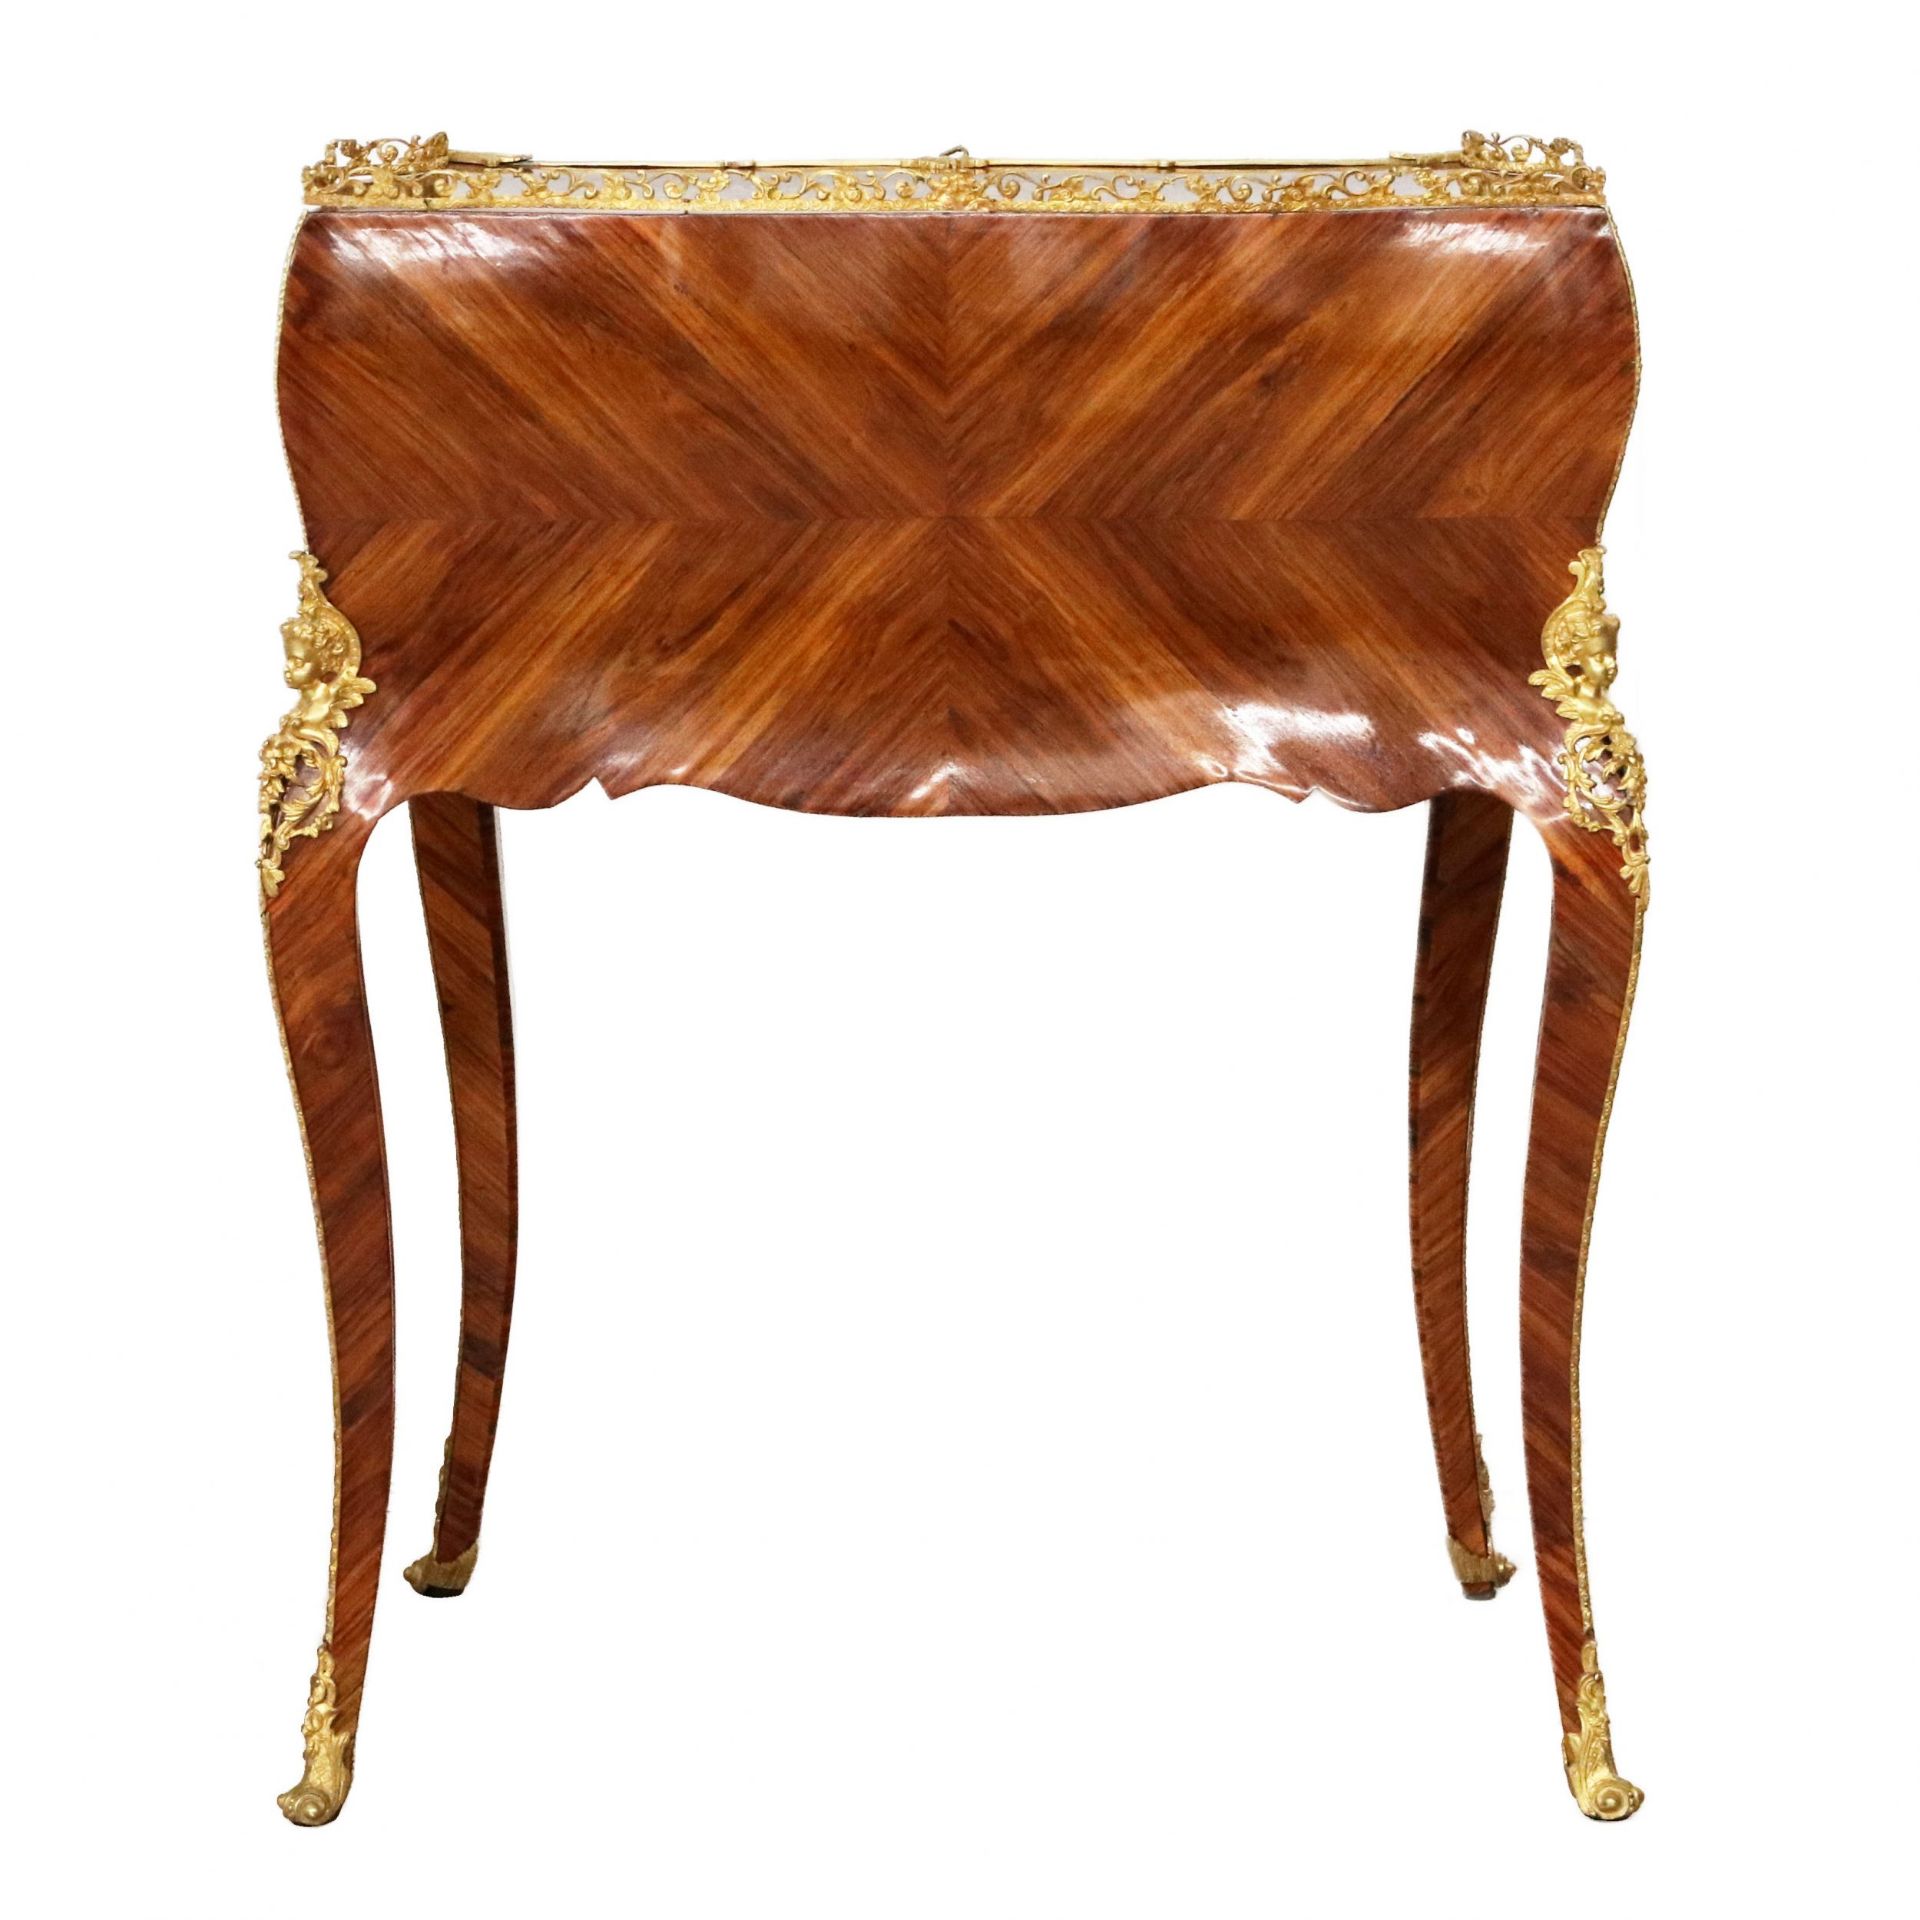 Coquettish ladies` bureau in wood and gilded bronze, Louis XV style. - Image 7 of 11